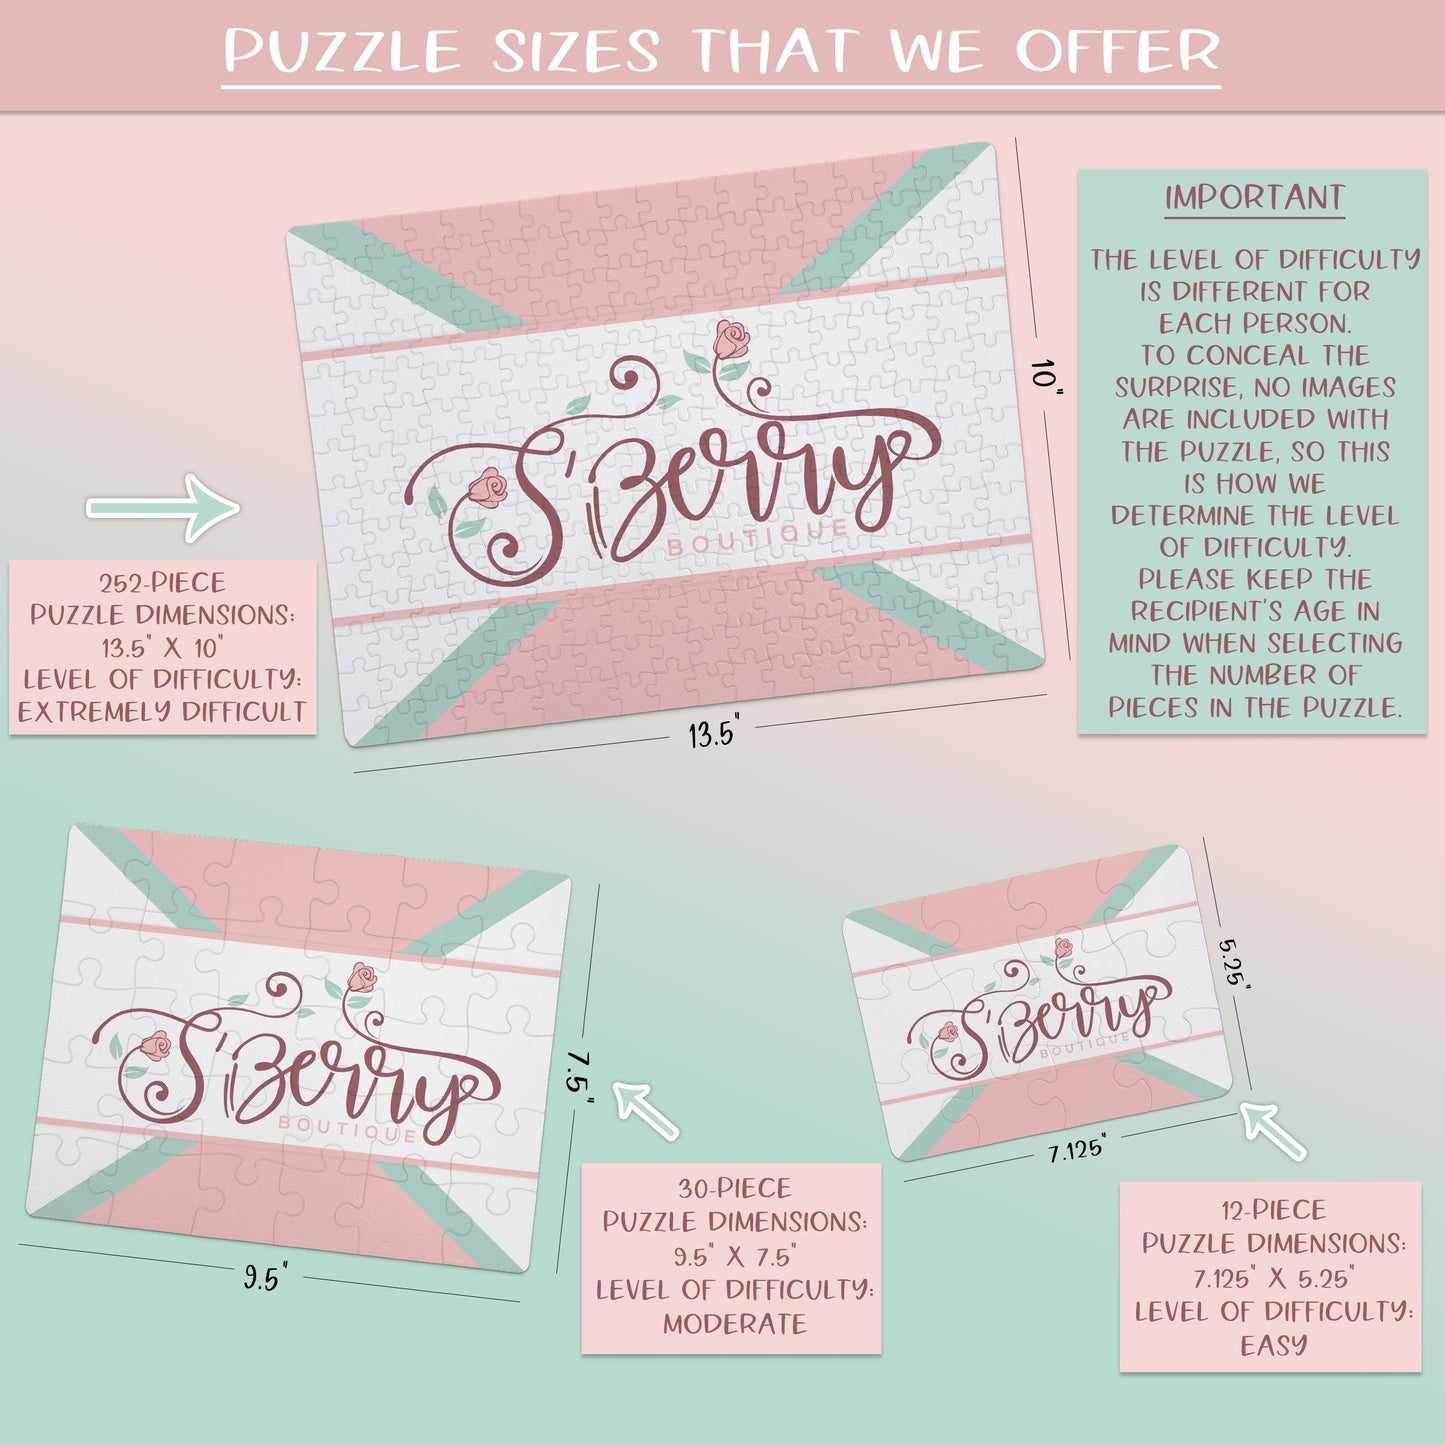 Create Your Own Puzzle - Stork Design - CYOP0299 | S'Berry Boutique